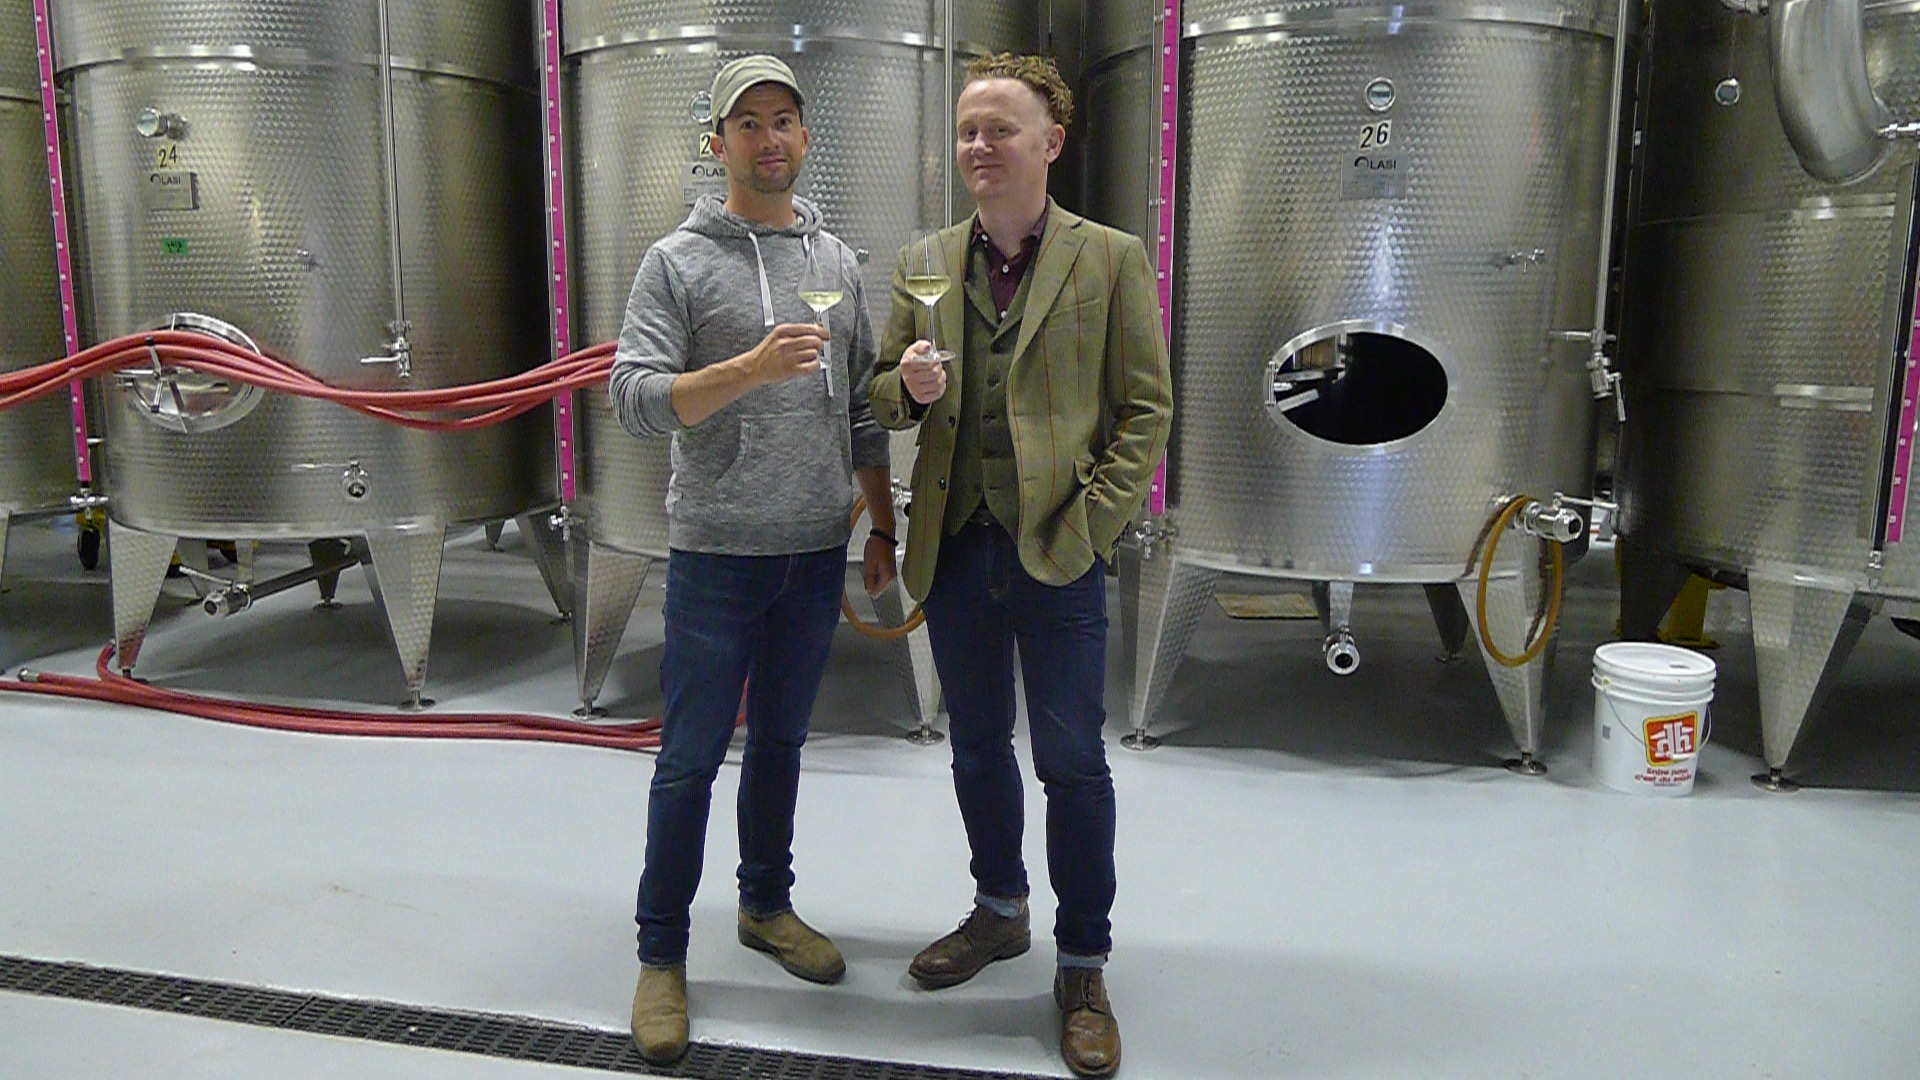 Two Sisters Winemaker Adam Pearce with Good Food Revolution's Adam Pearce at the winery.